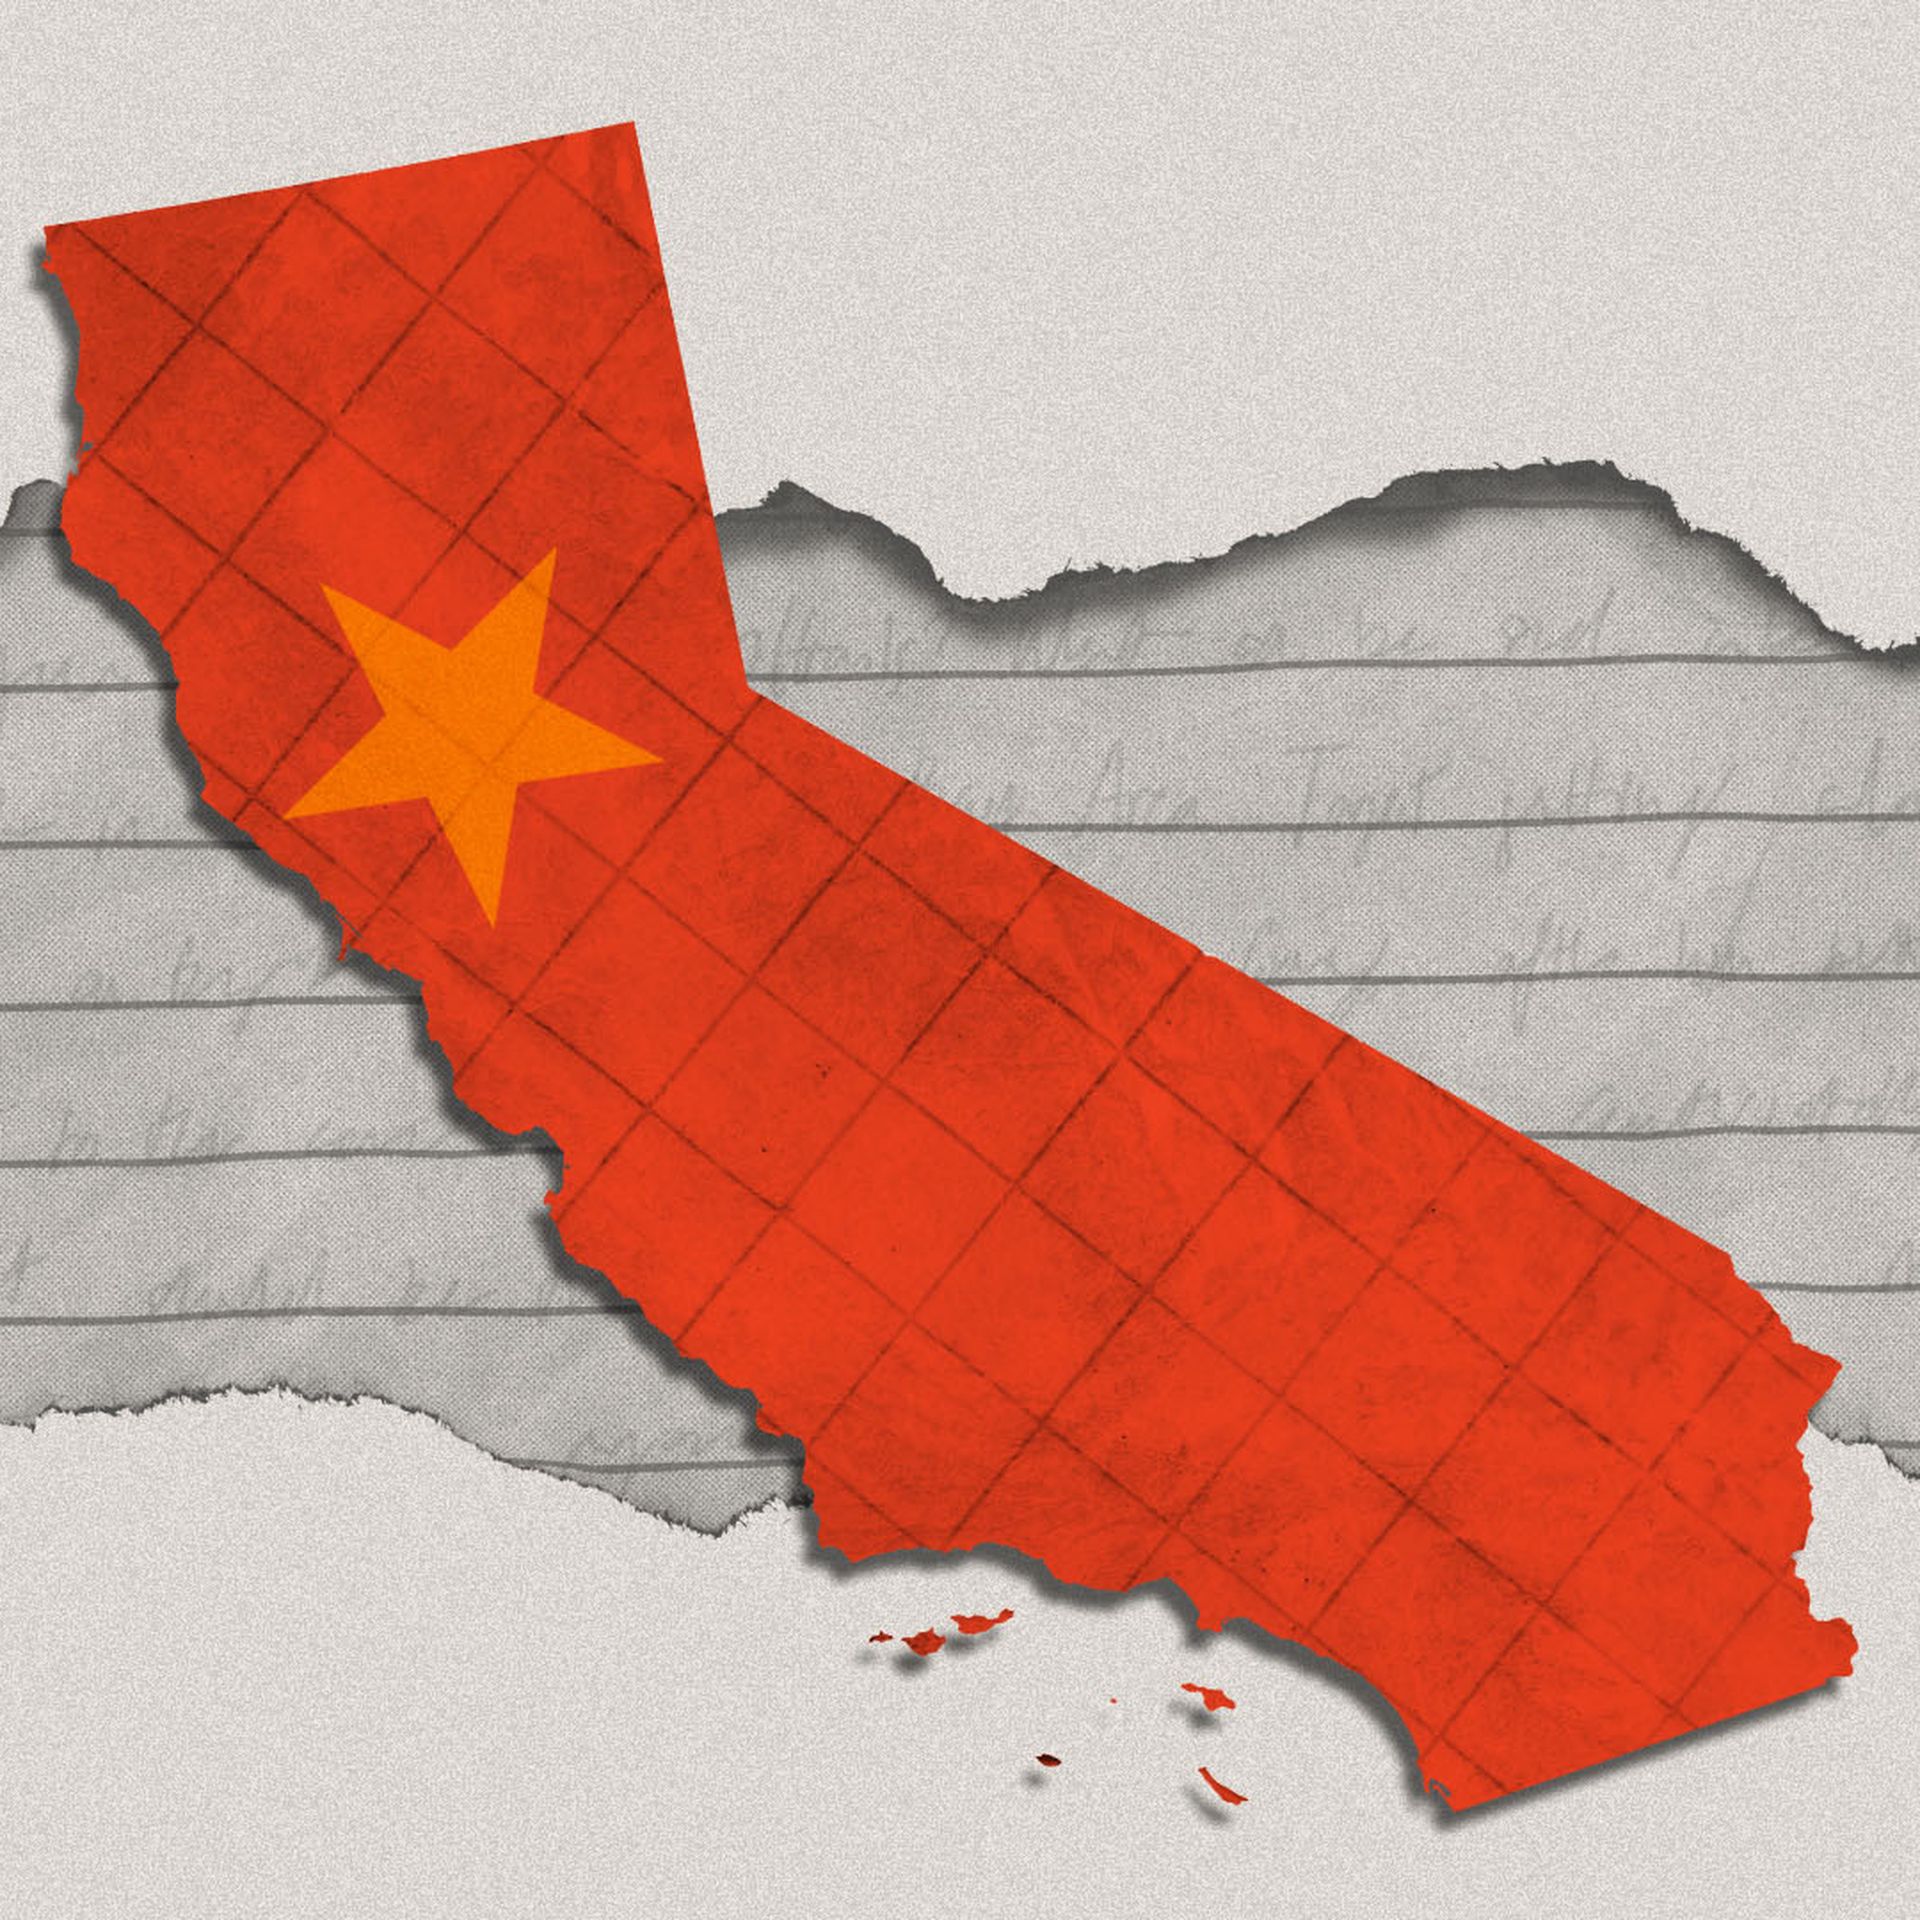 Illustration of California with star over Bay Area